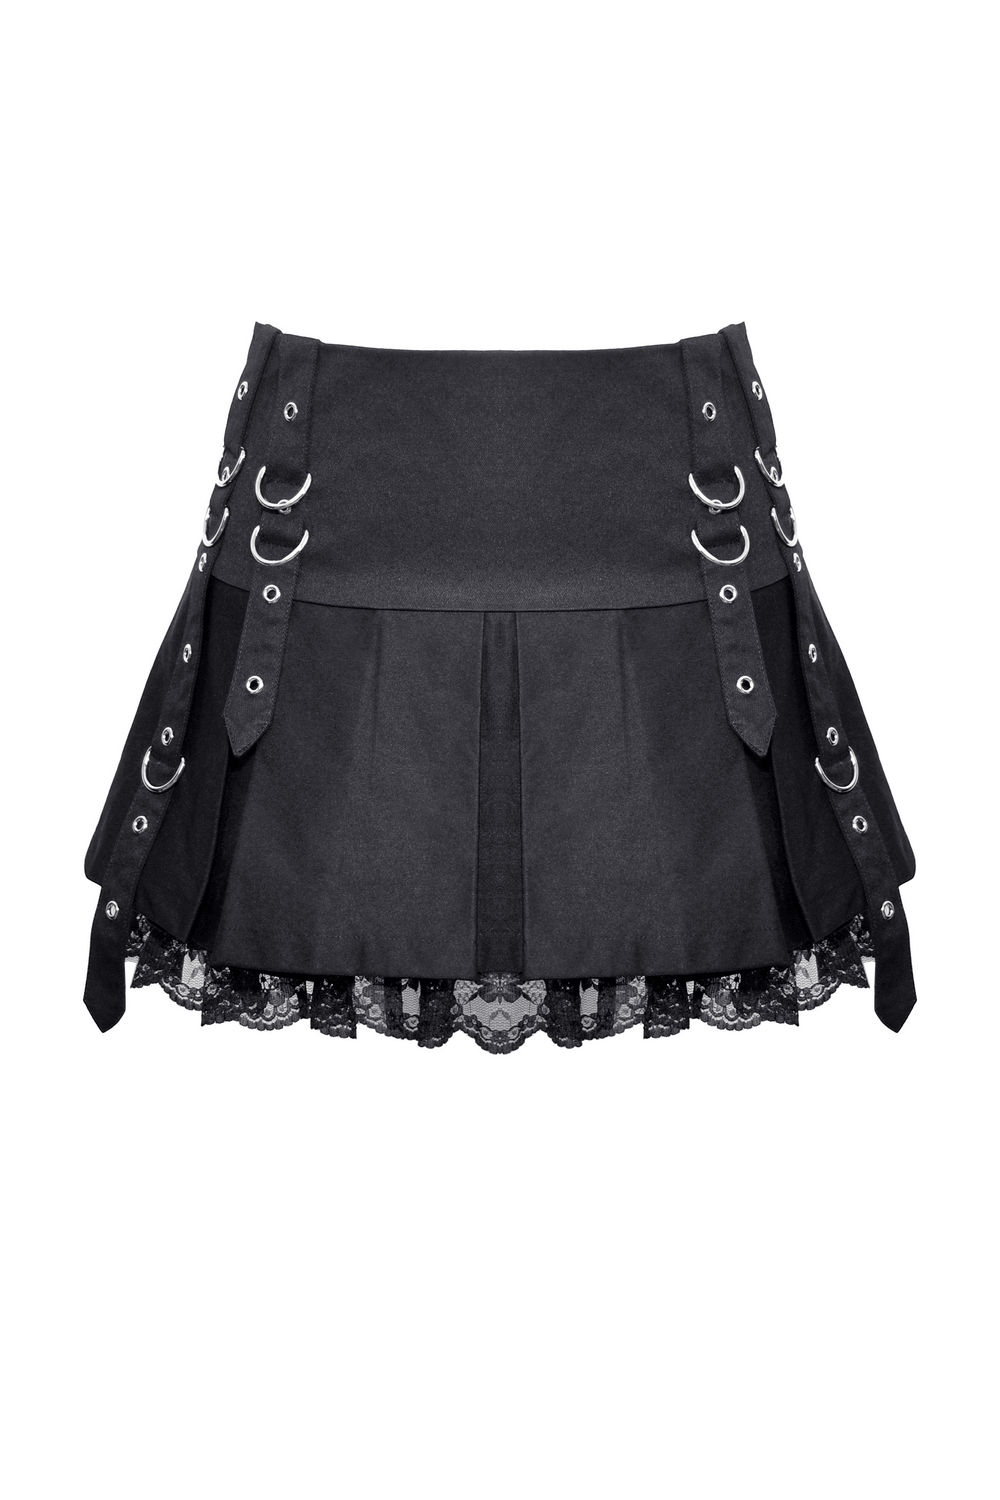 Punk Women's Mini Skirt with Lace Trim and O-Rings